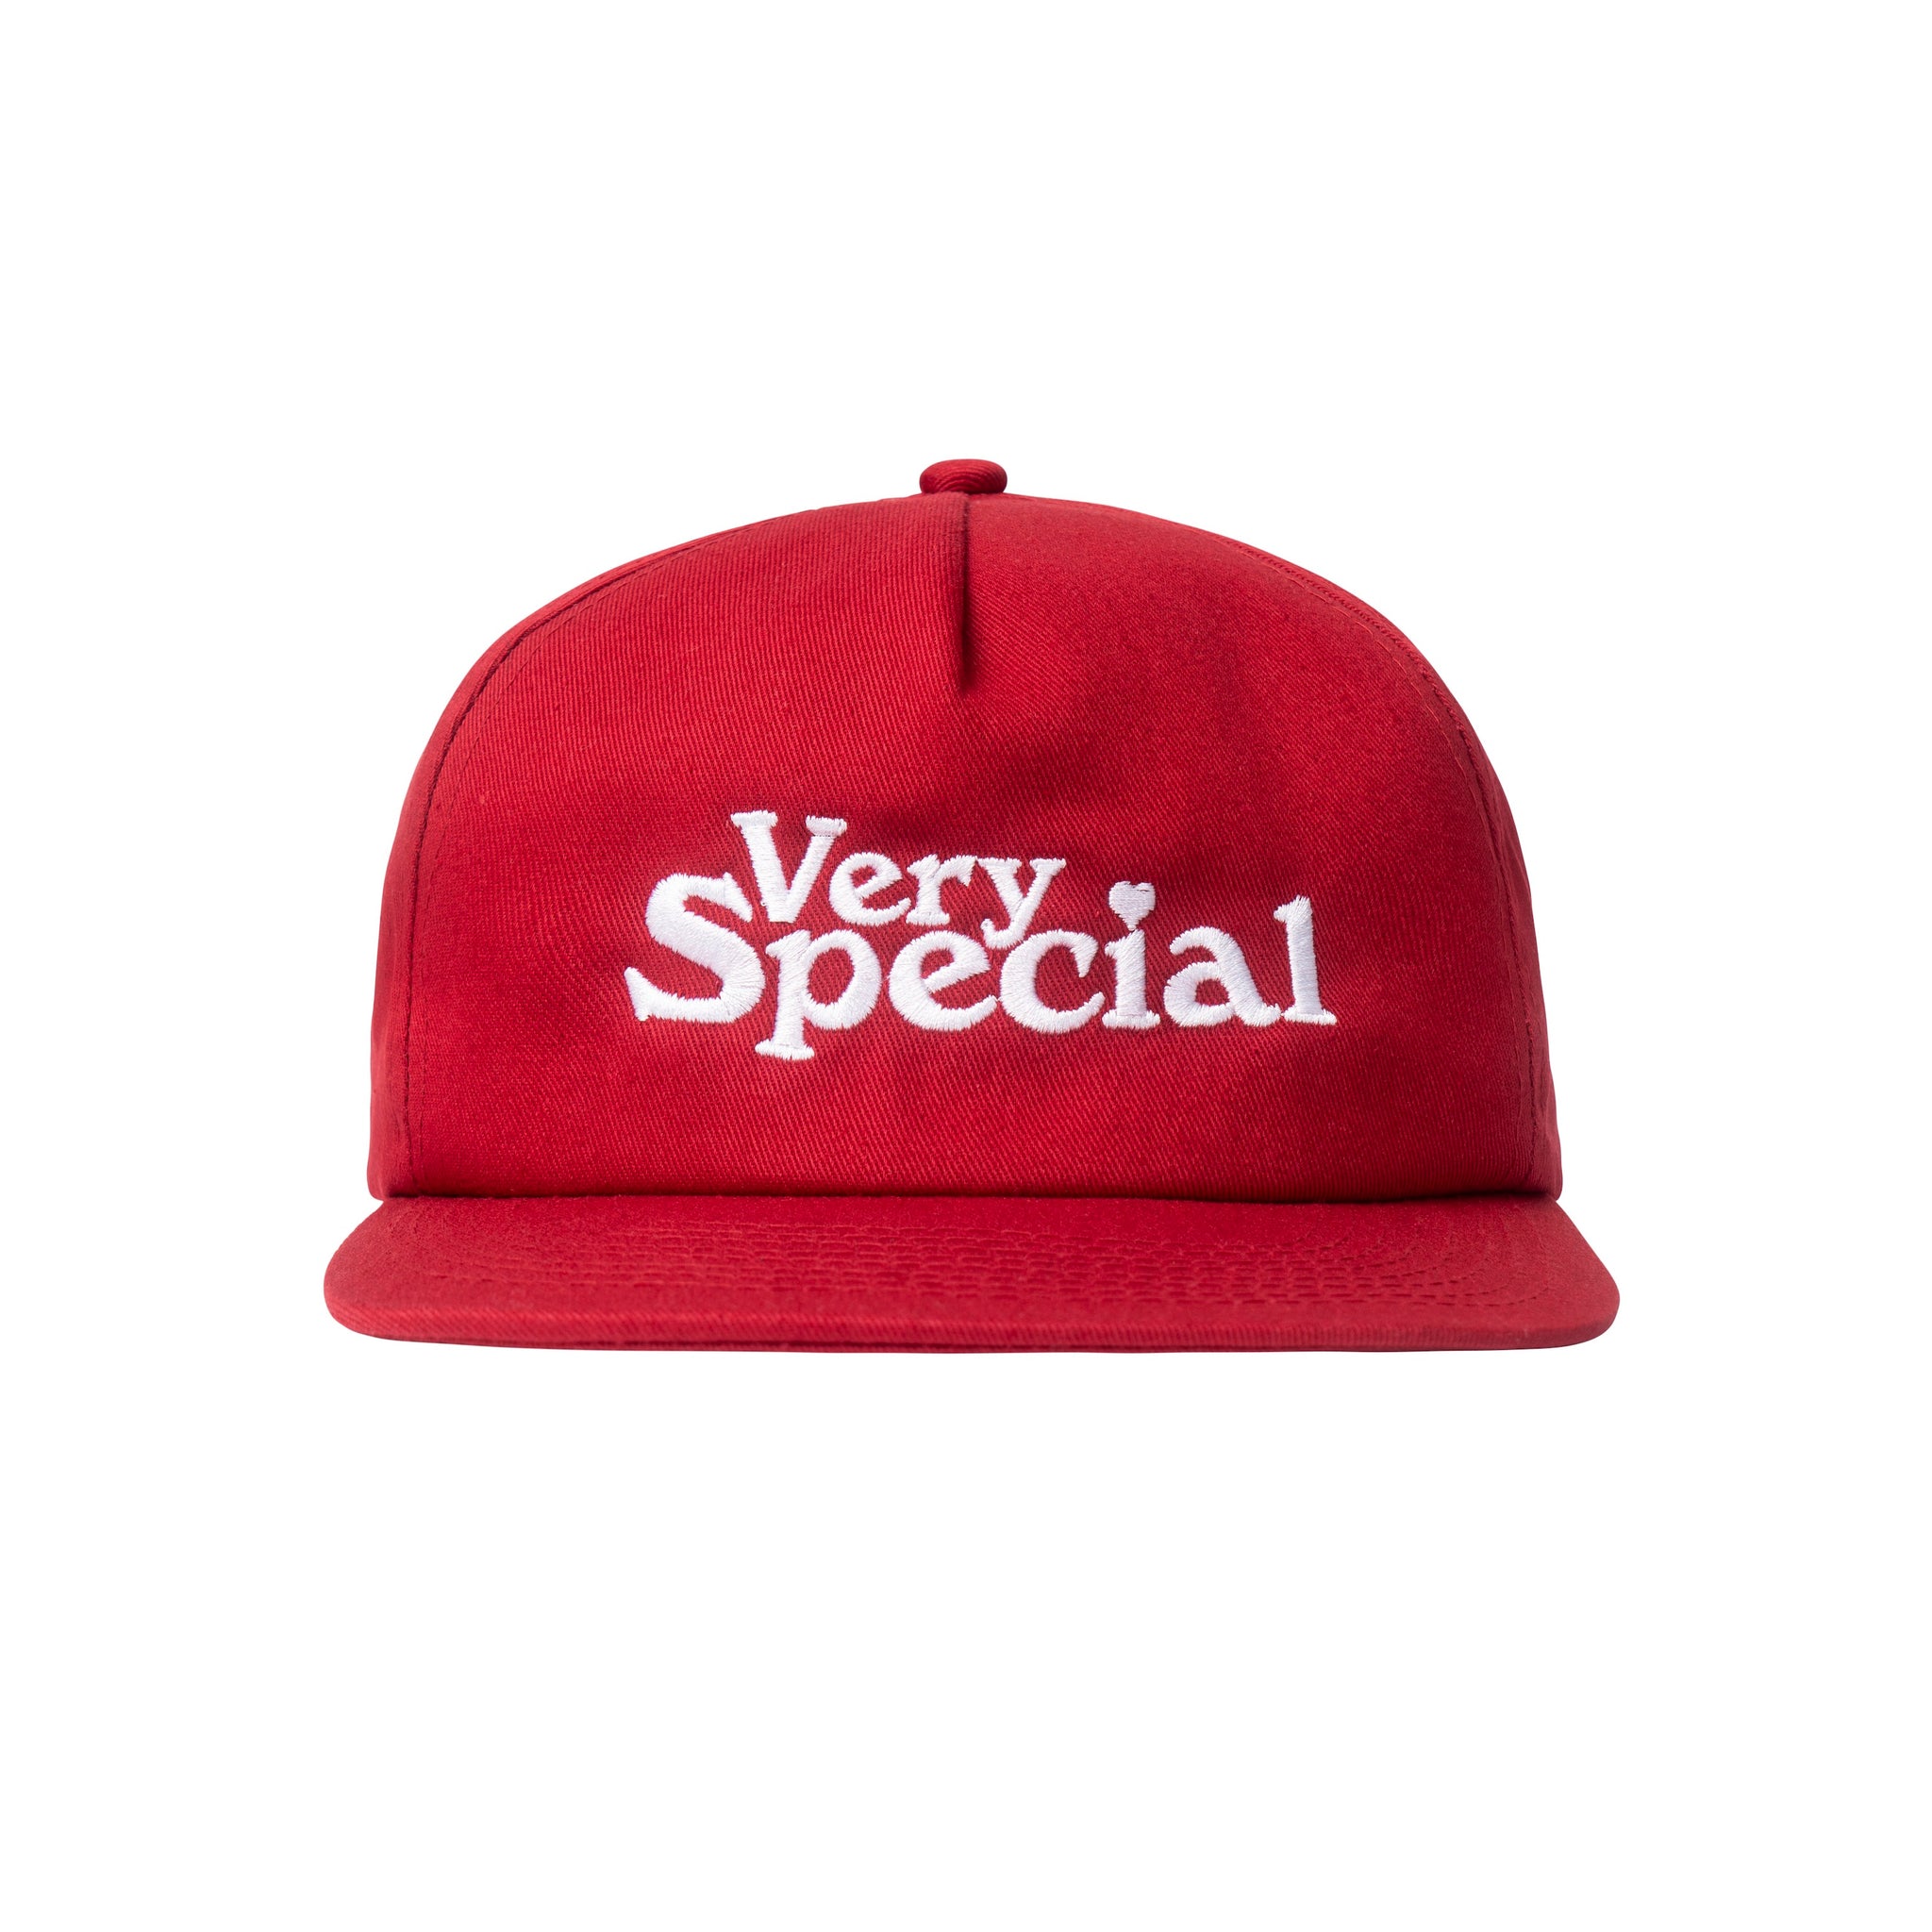 Very Special Love Hat - Red